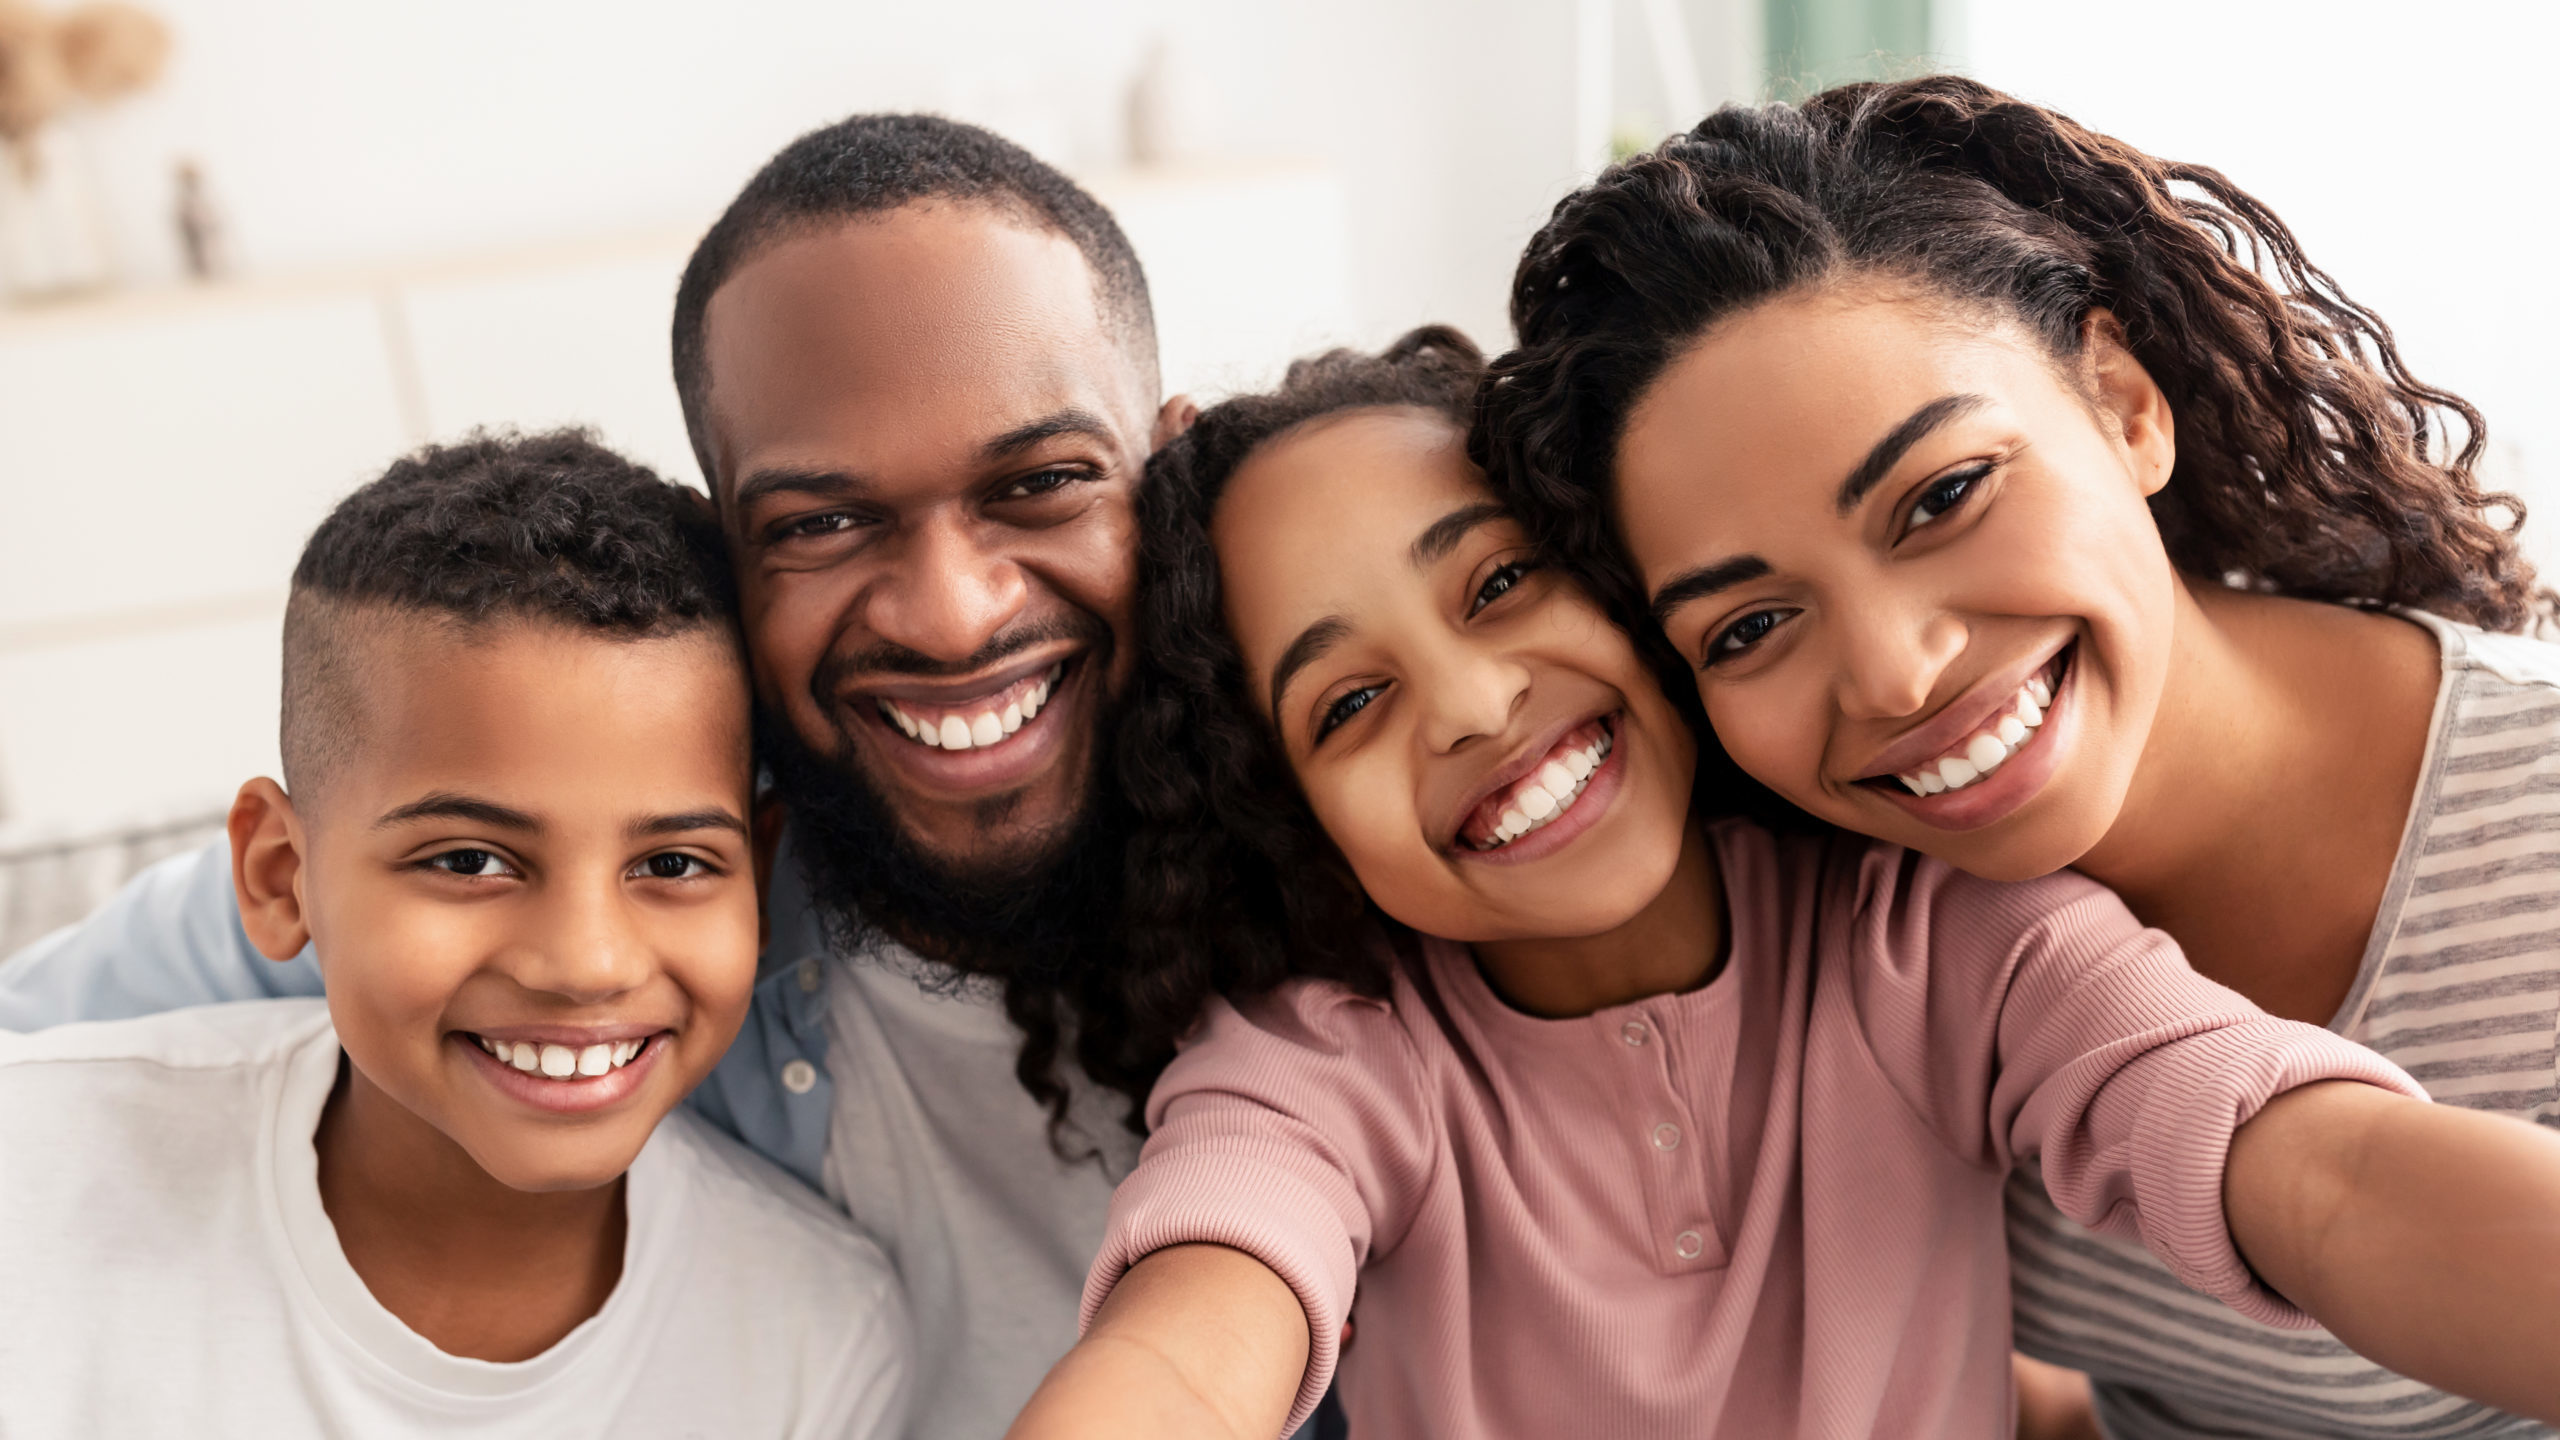 Portrait of African American family taking a selfie together at home